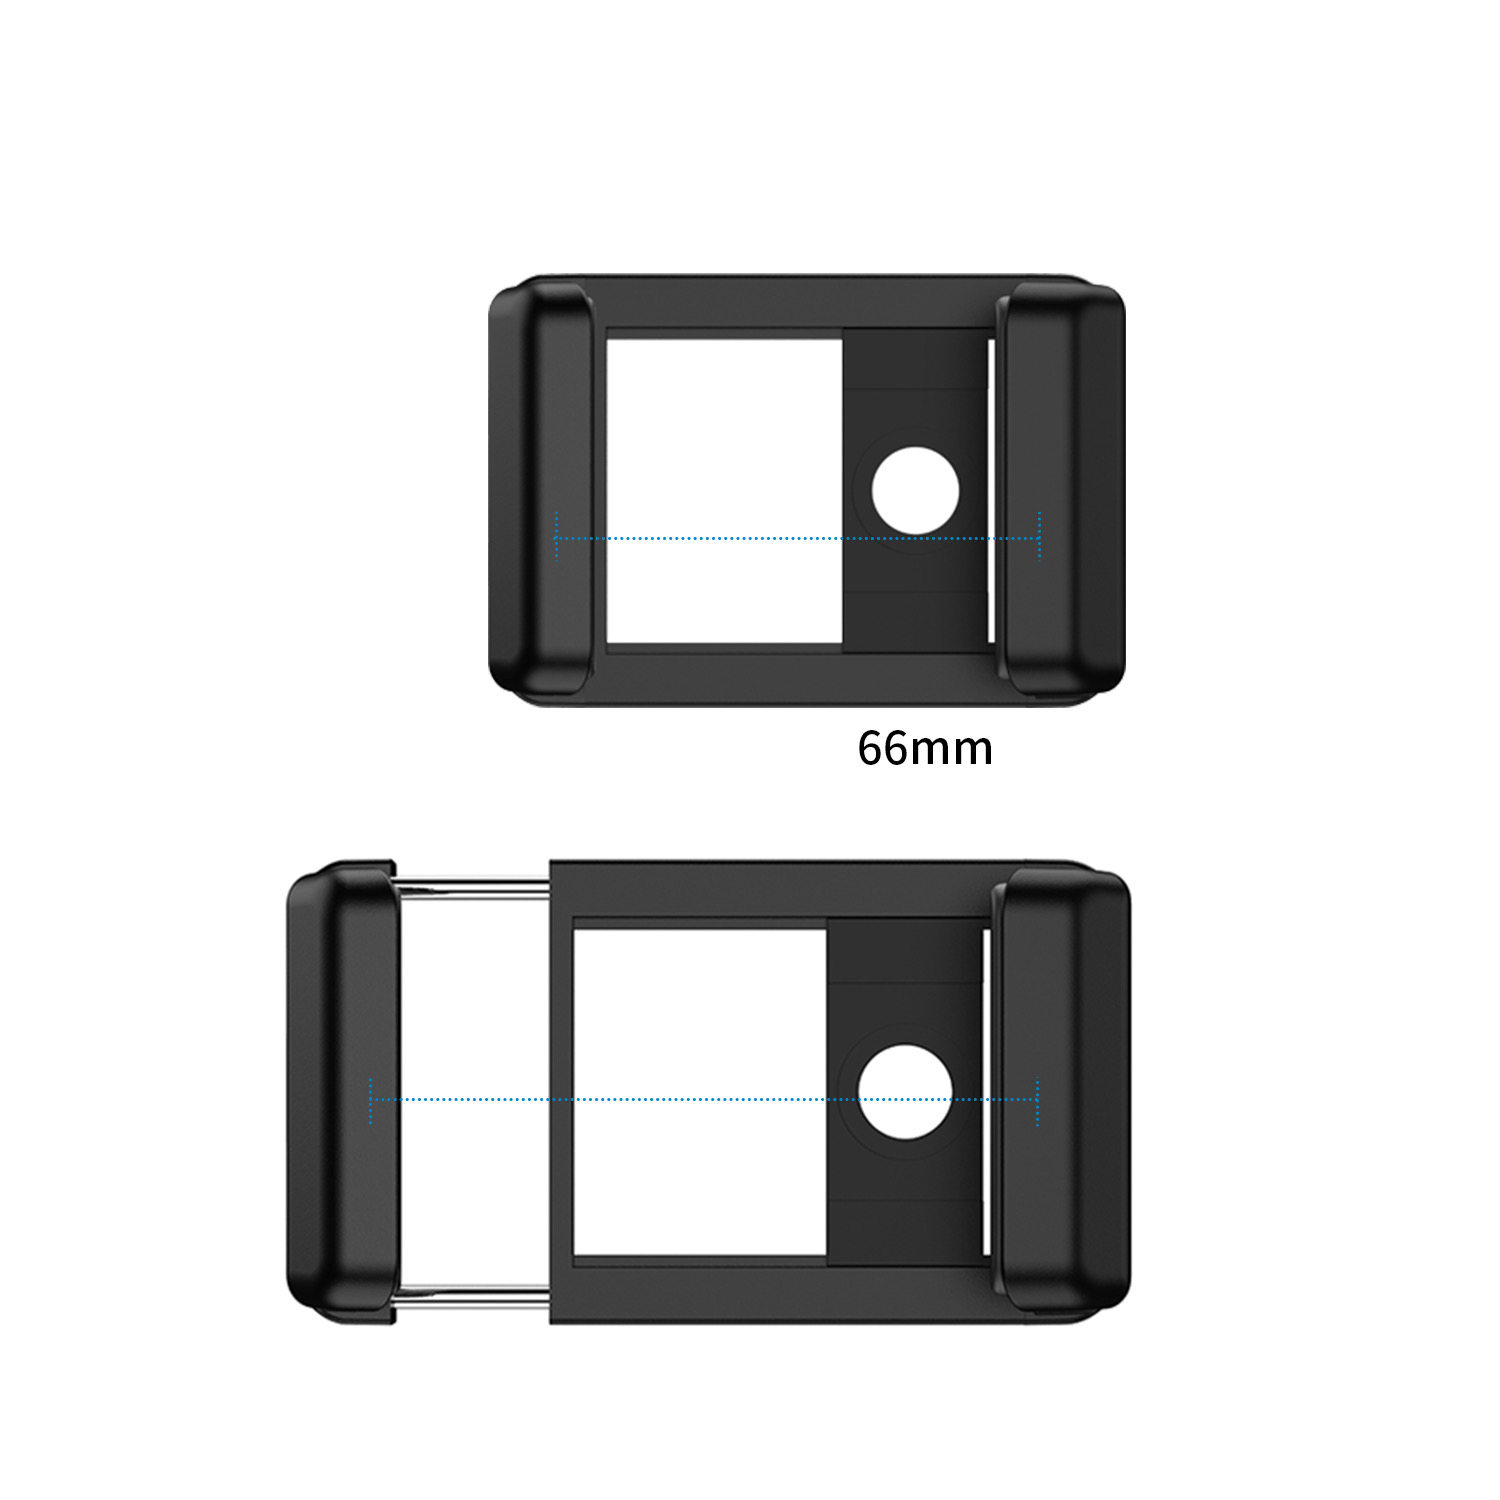 [New] Apexel Adjustable 17mm Mobile Phone Lens Holder Others - APEXEL INDIA - Mobile Lens - Mobile Camera Lens - Cellphone Accessories - Phone Lens - Smartphone Lens